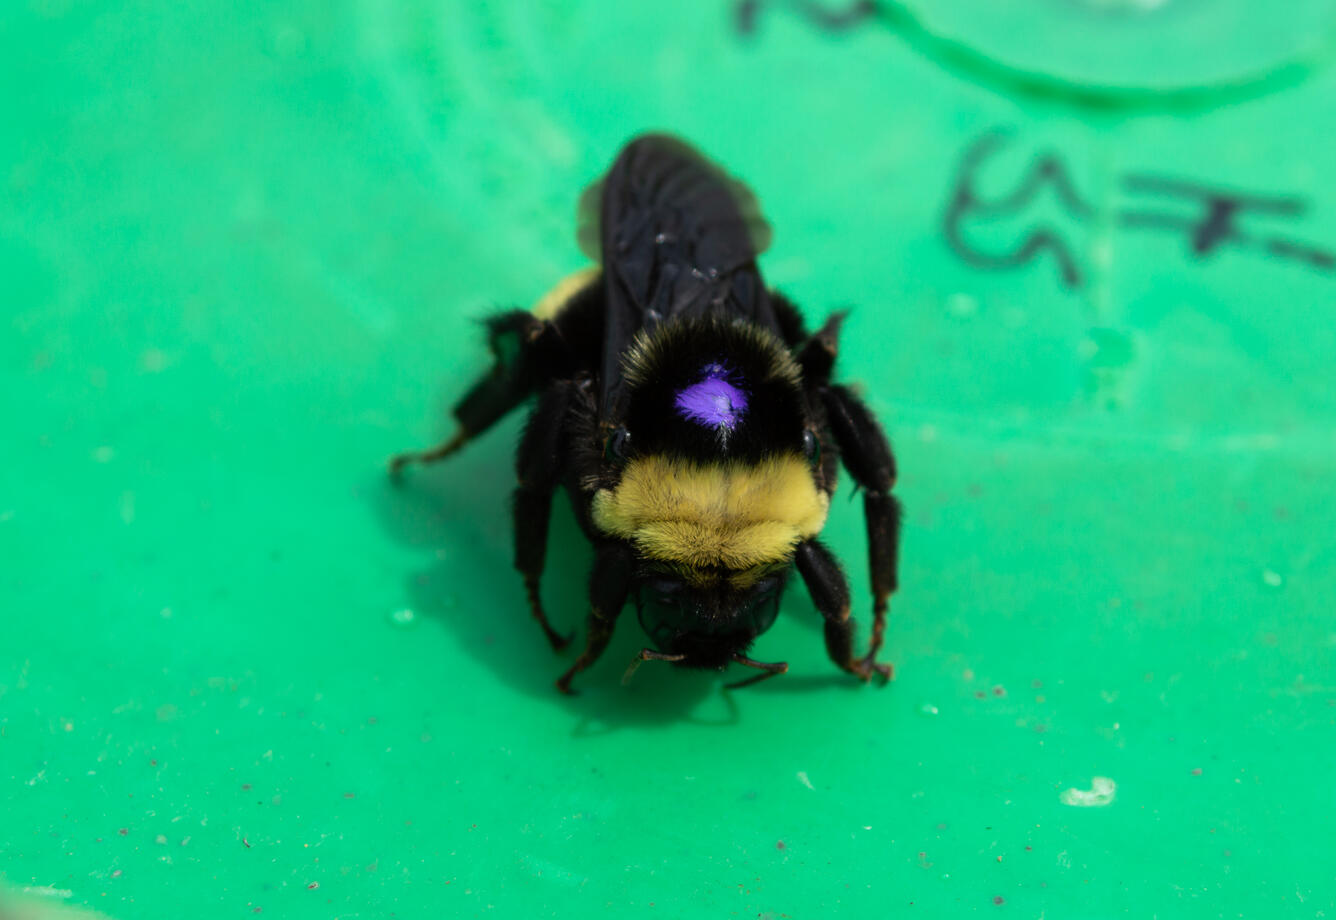 Bumble bee with a purple dot on its head, placed there by a scientist